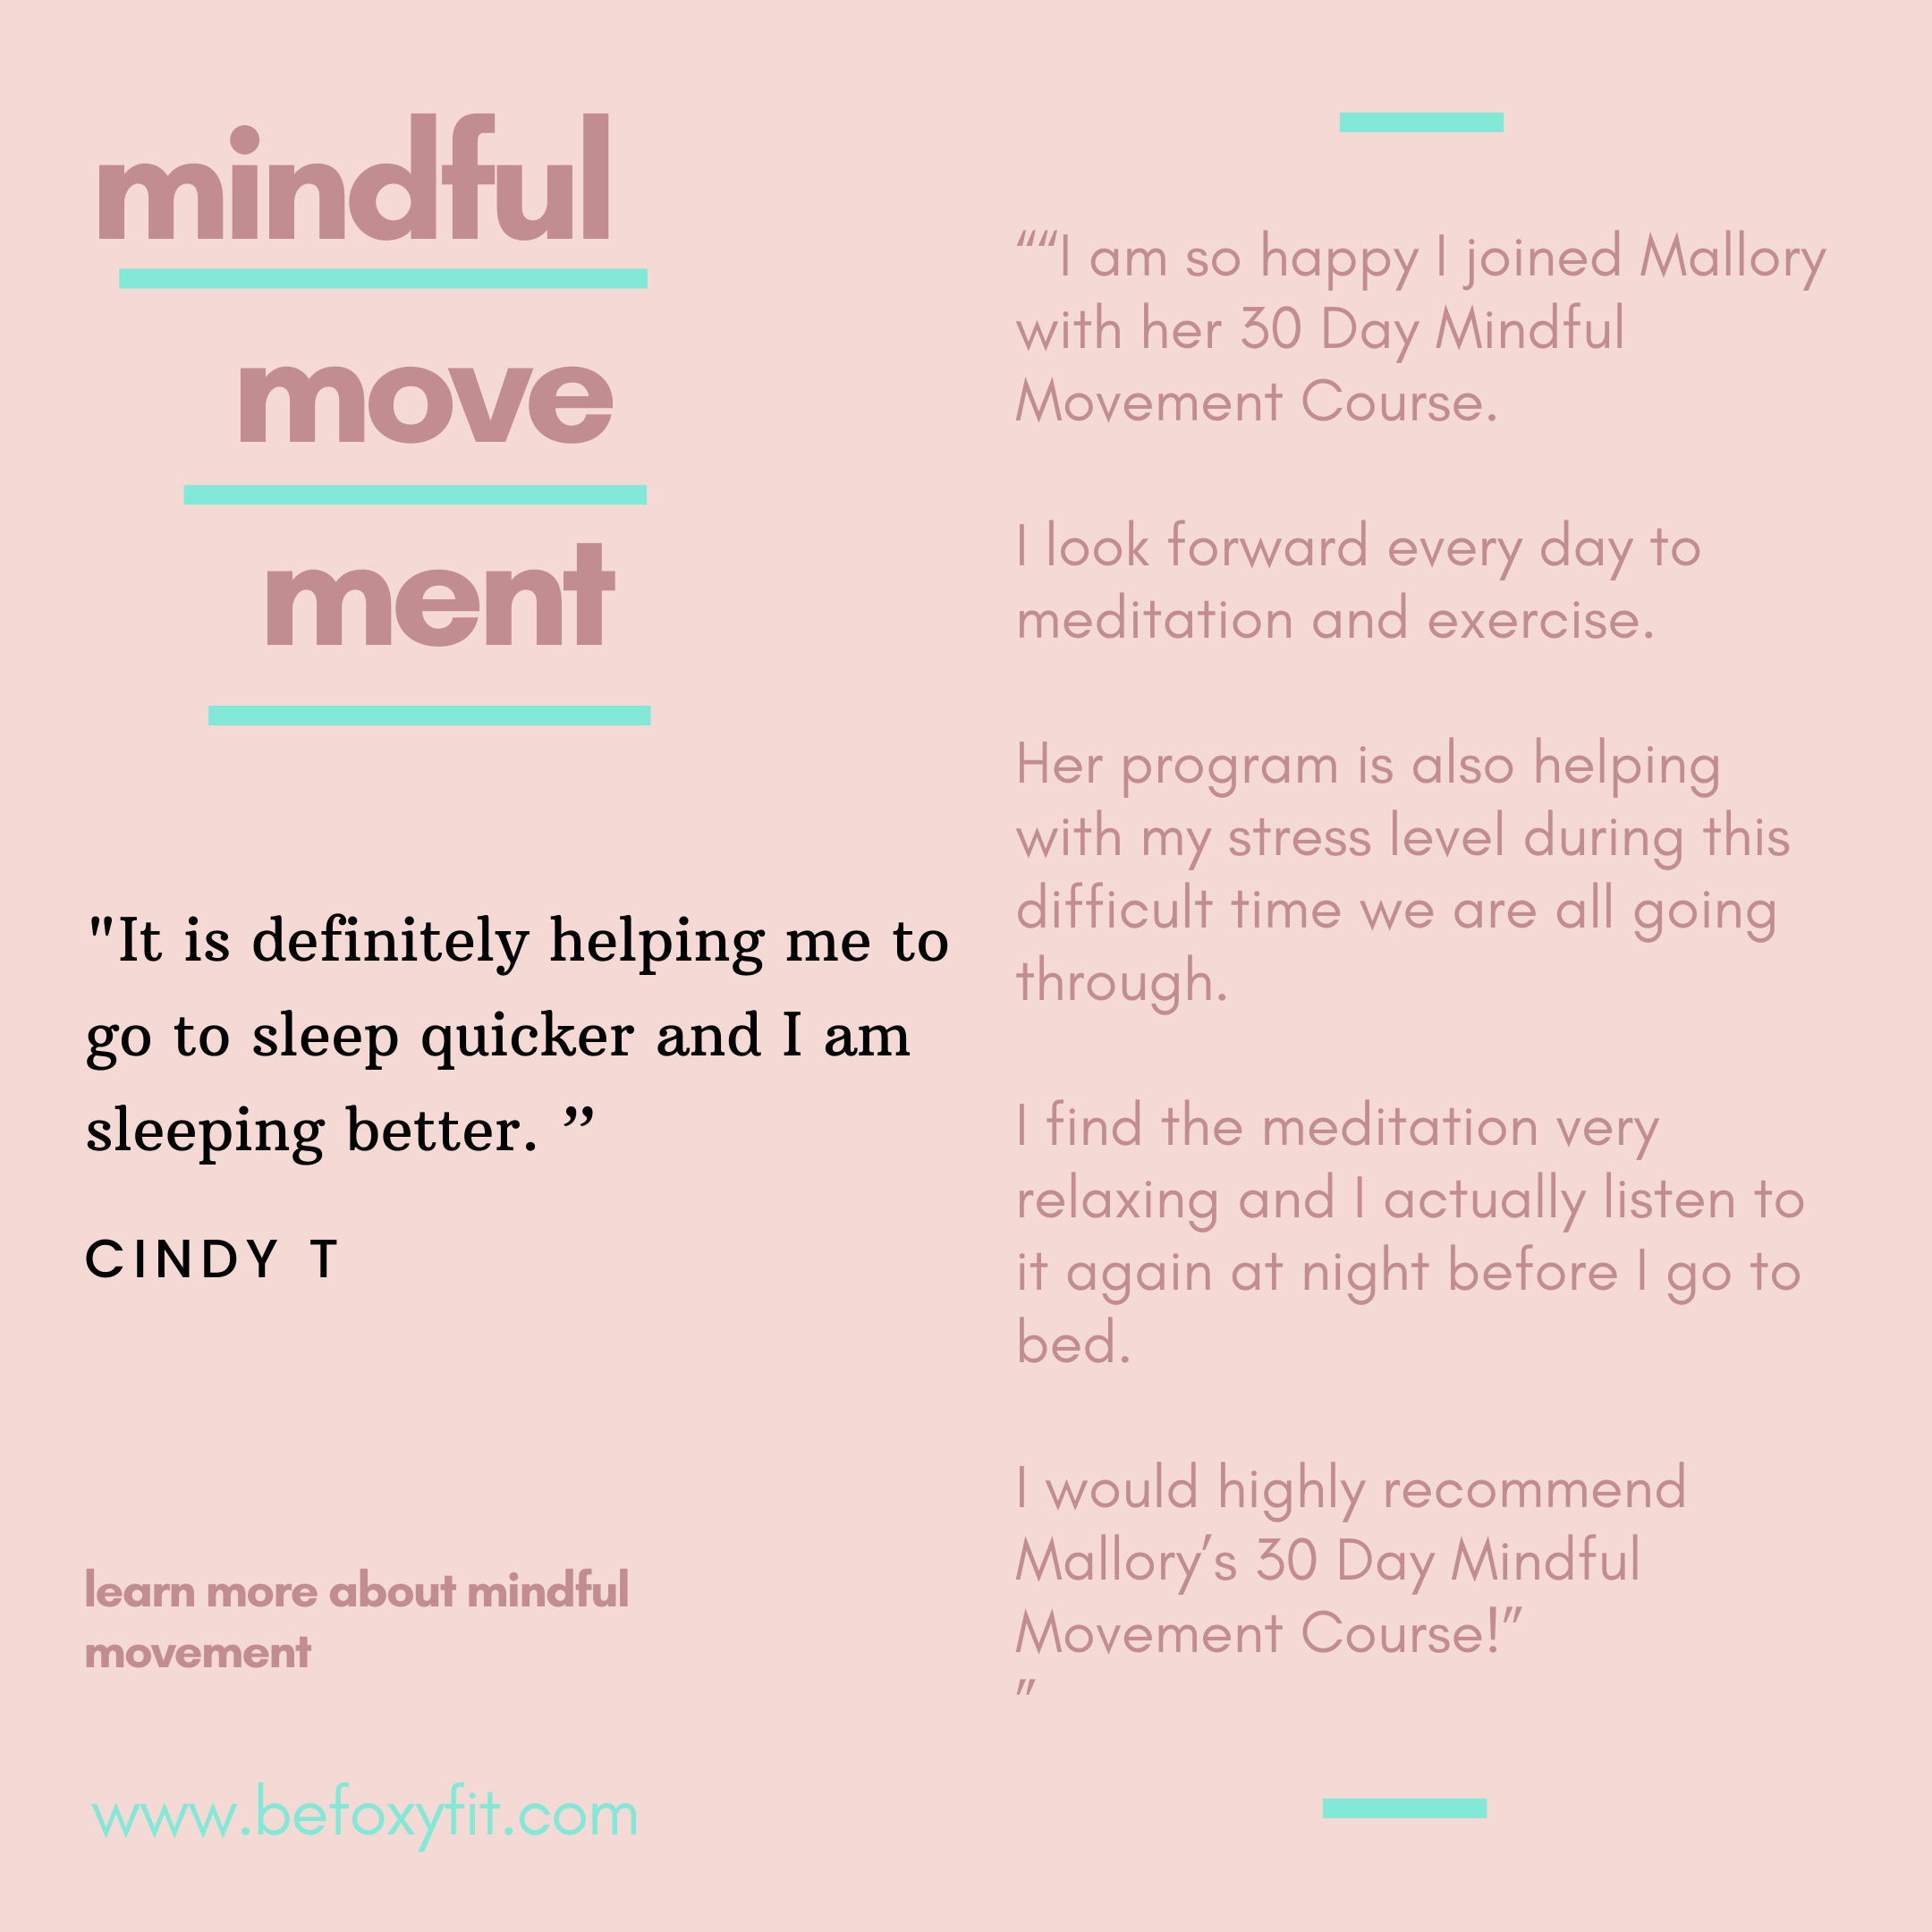 Copy of Copy of Copy of mindful move ment.png